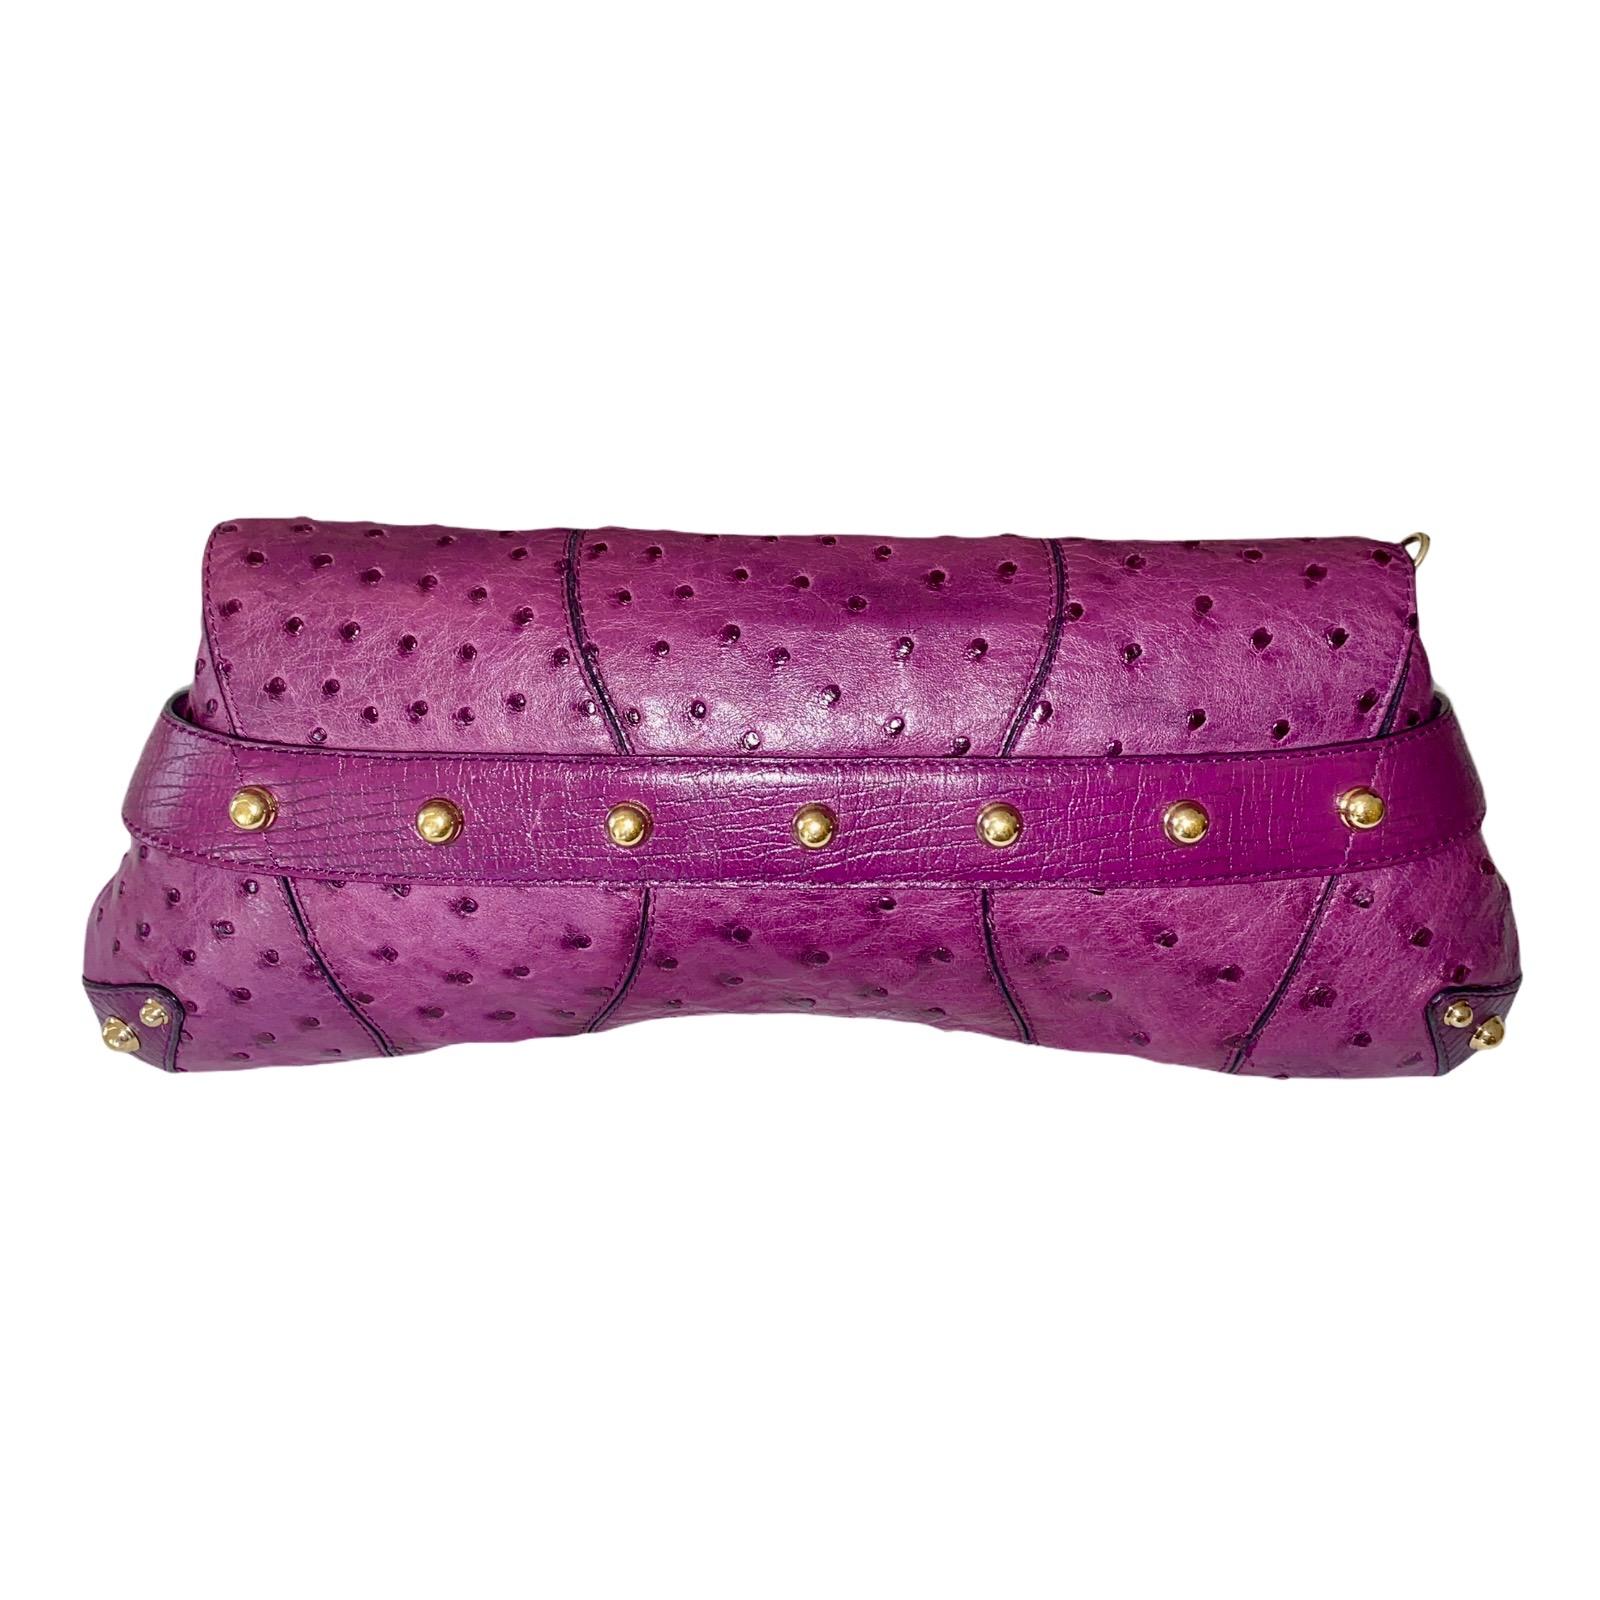 Beautiful Purple Gucci XL Horsebit Flap Bag
A timeless Gucci piece 
Designed by Tom Ford for Gucci
For this famous 2003/2004 collection
Signature horsebit detail
Made of luxurious real ostrich skin
Fully lined with suede skin
One inner